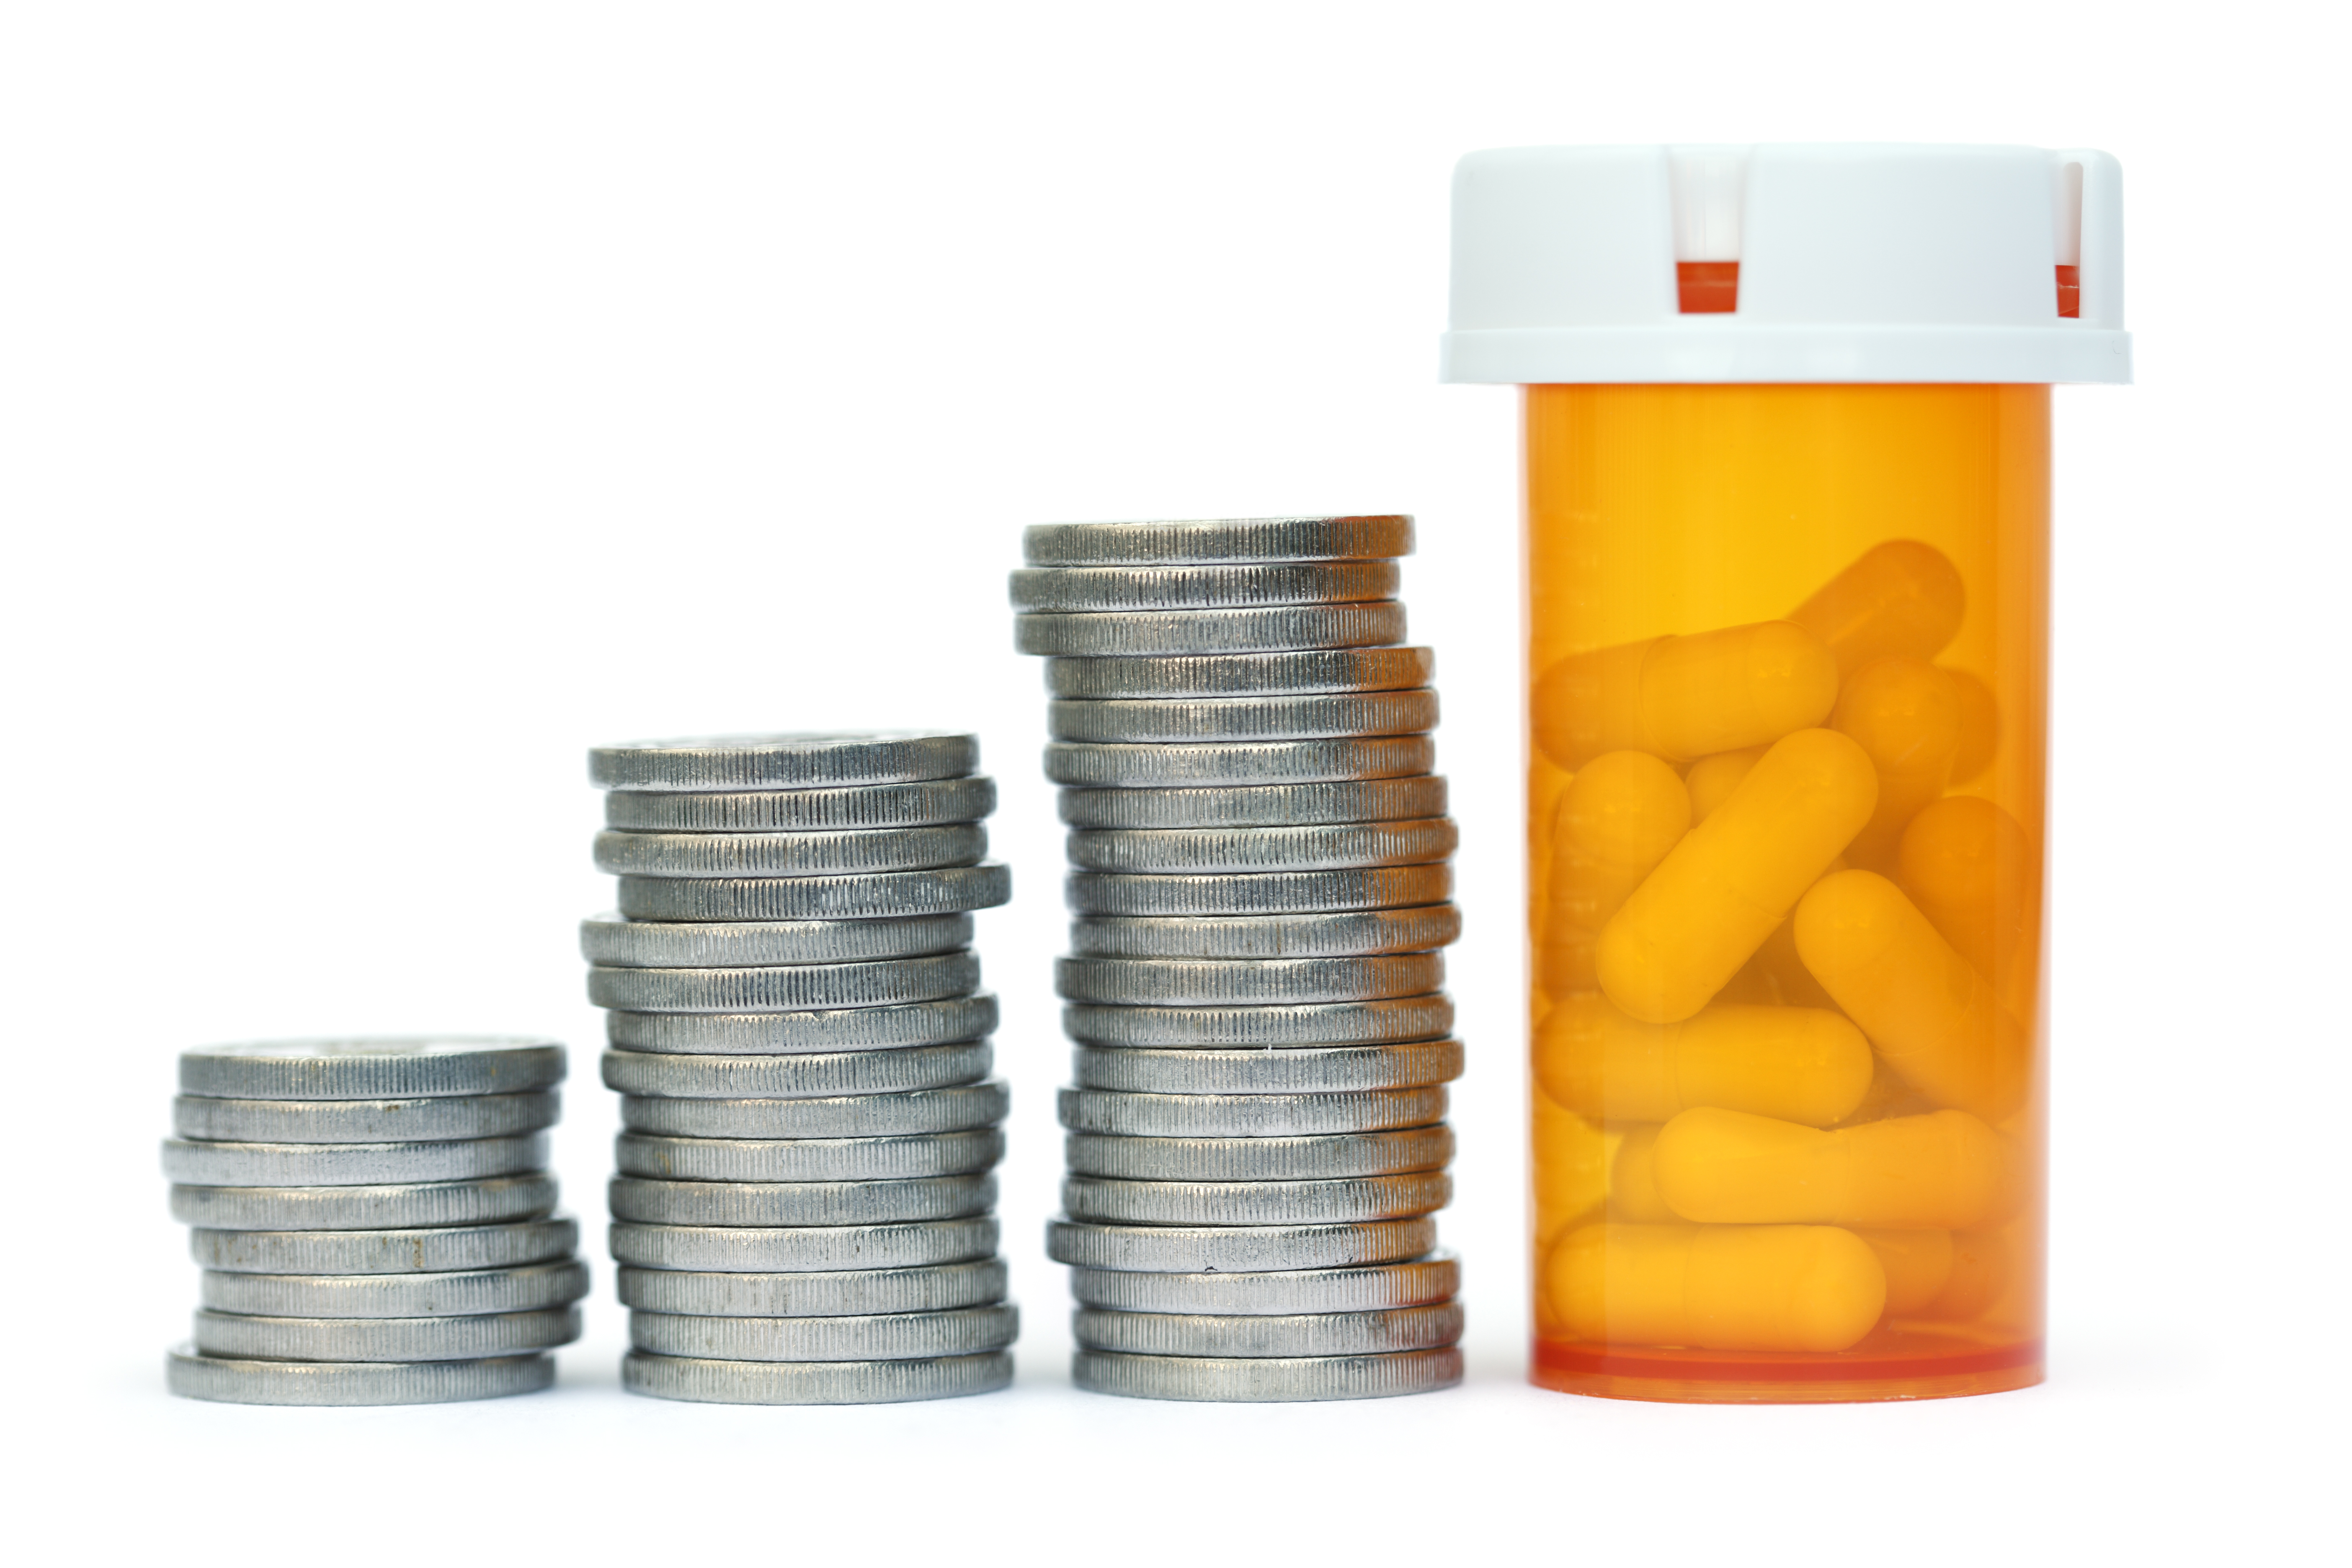 Three stacks of coins in gradually taller amounts from left to right, with a prescription bottle of pills at the right that is tallest.